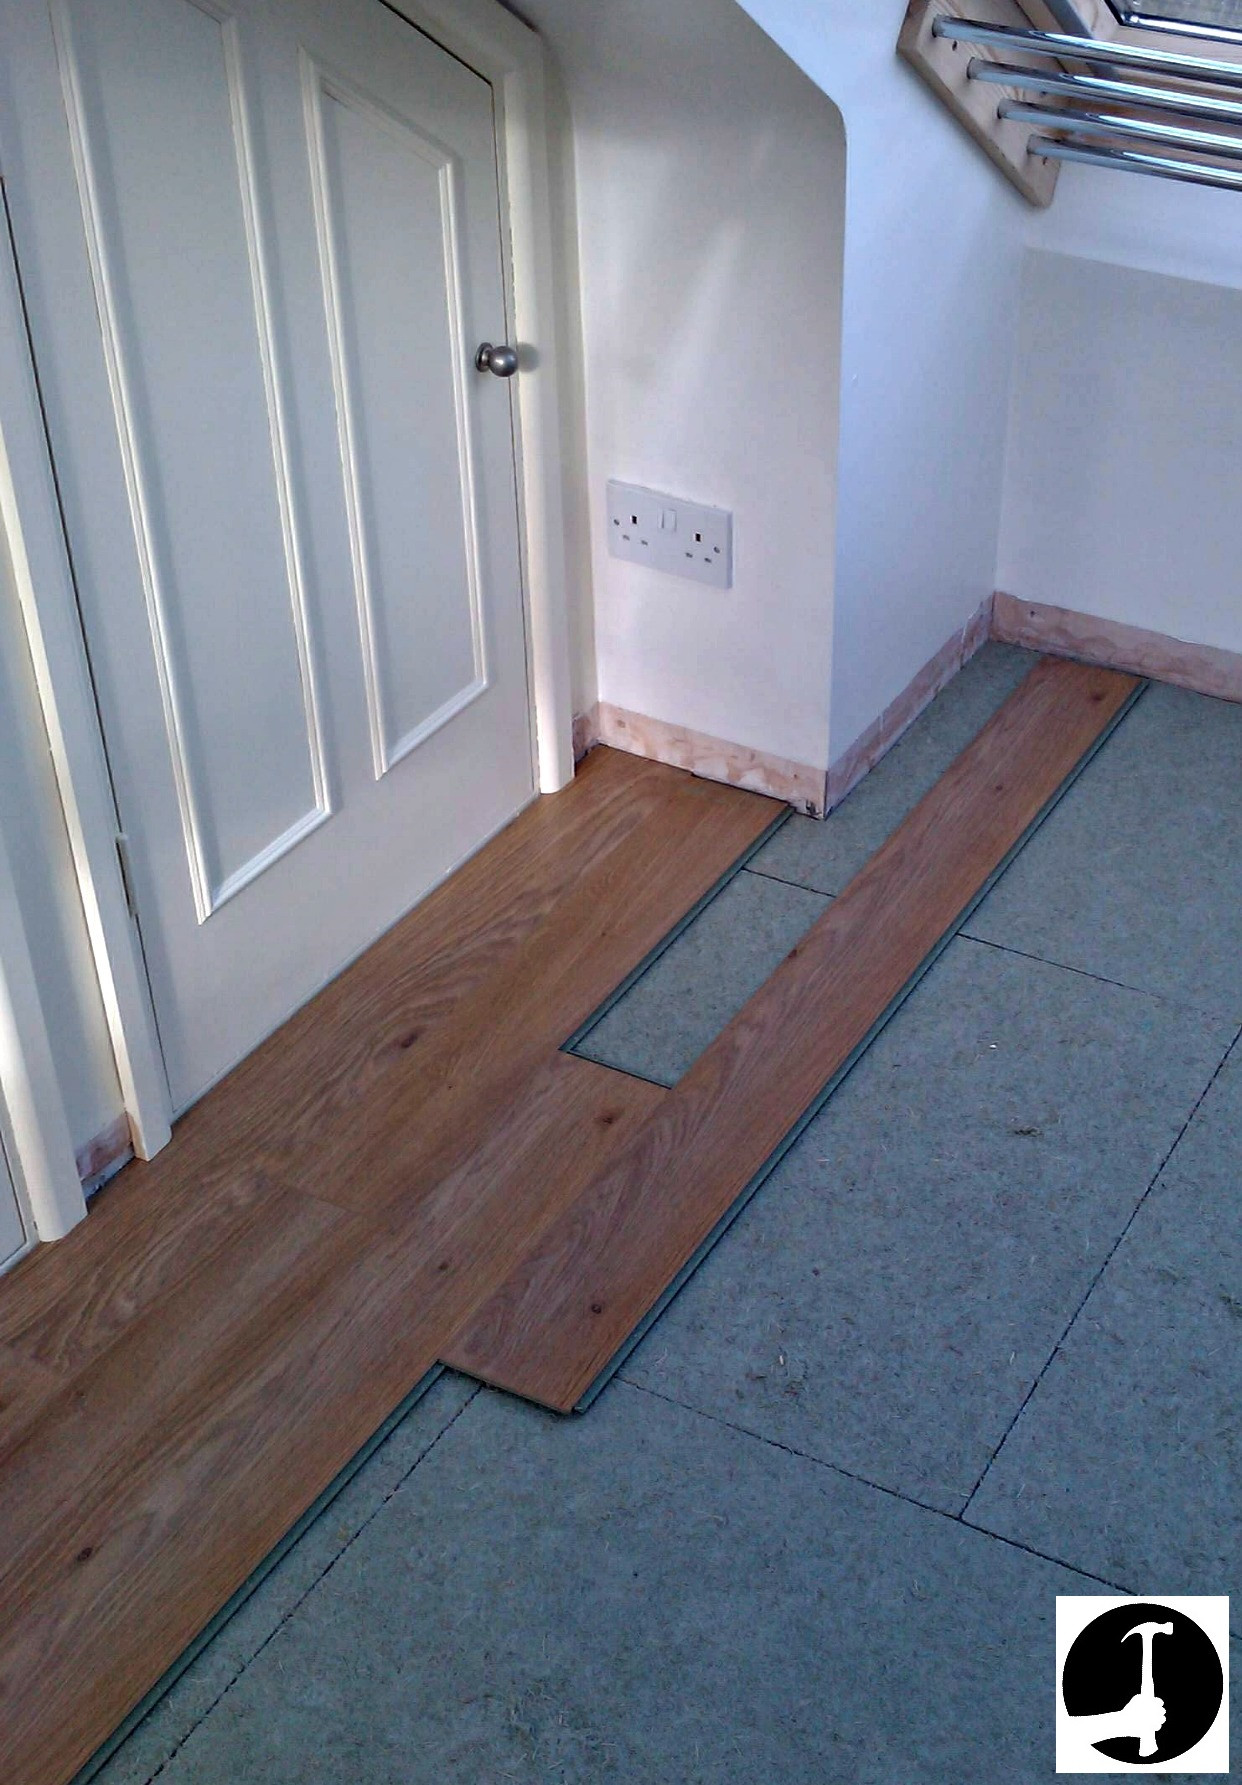 18 Unique How to Fix Hardwood Floor Lifting 2024 free download how to fix hardwood floor lifting of how to install laminate flooring with ease glued glue less systems inside setting out laminate flooring